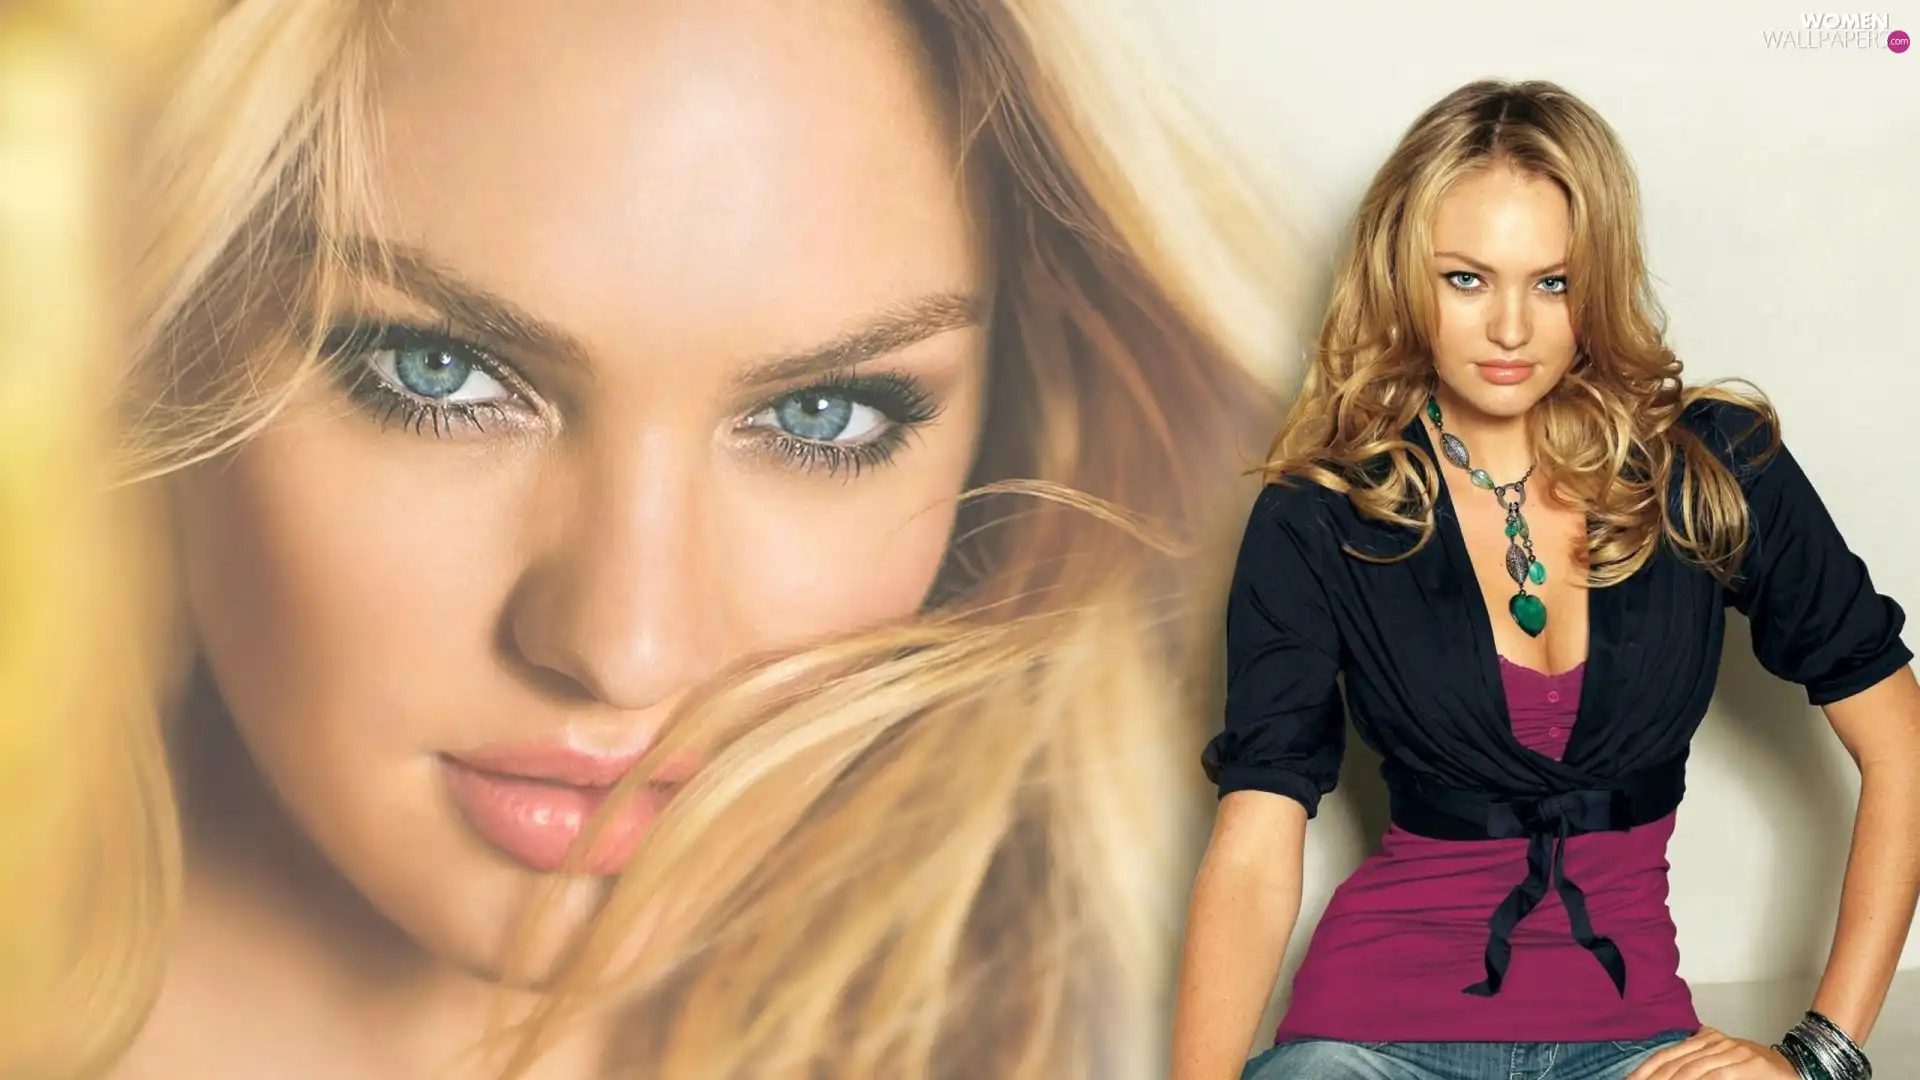 The look, Candice Swanepoel, Blonde